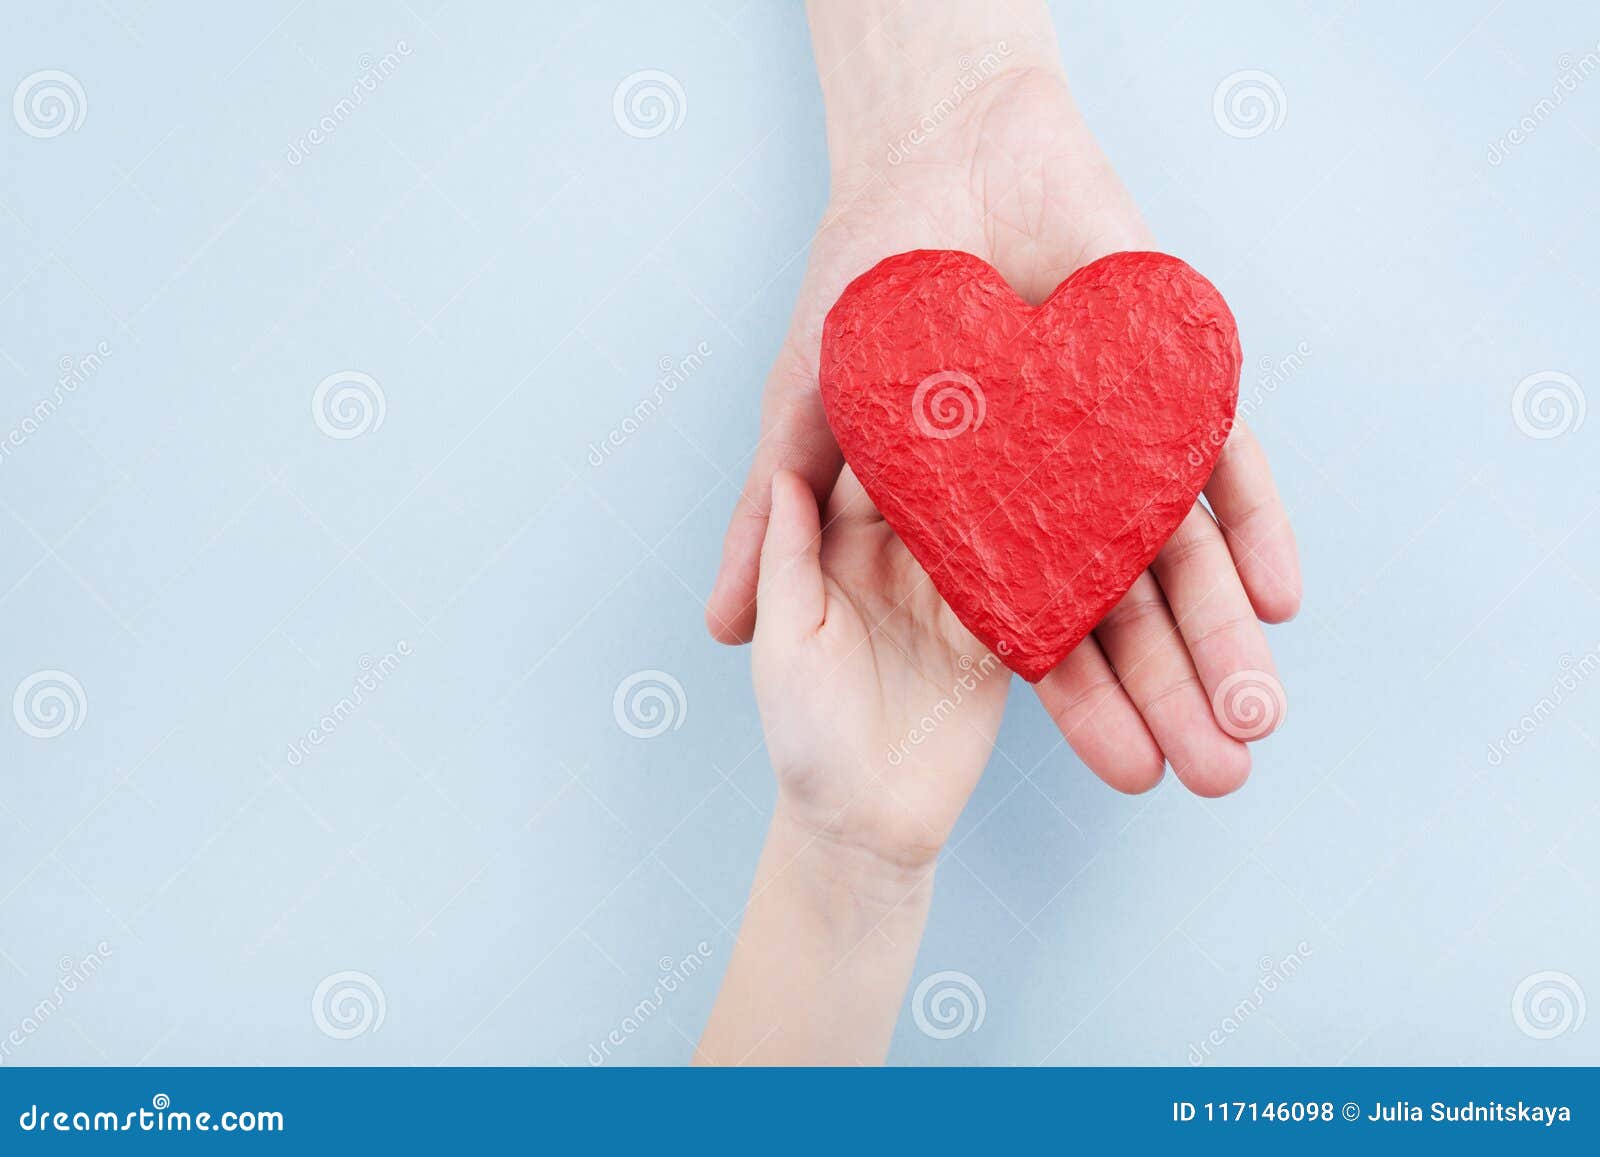 doctor and kid holding red heart in hands. family relationships, health care, pediatric cardiology concept.